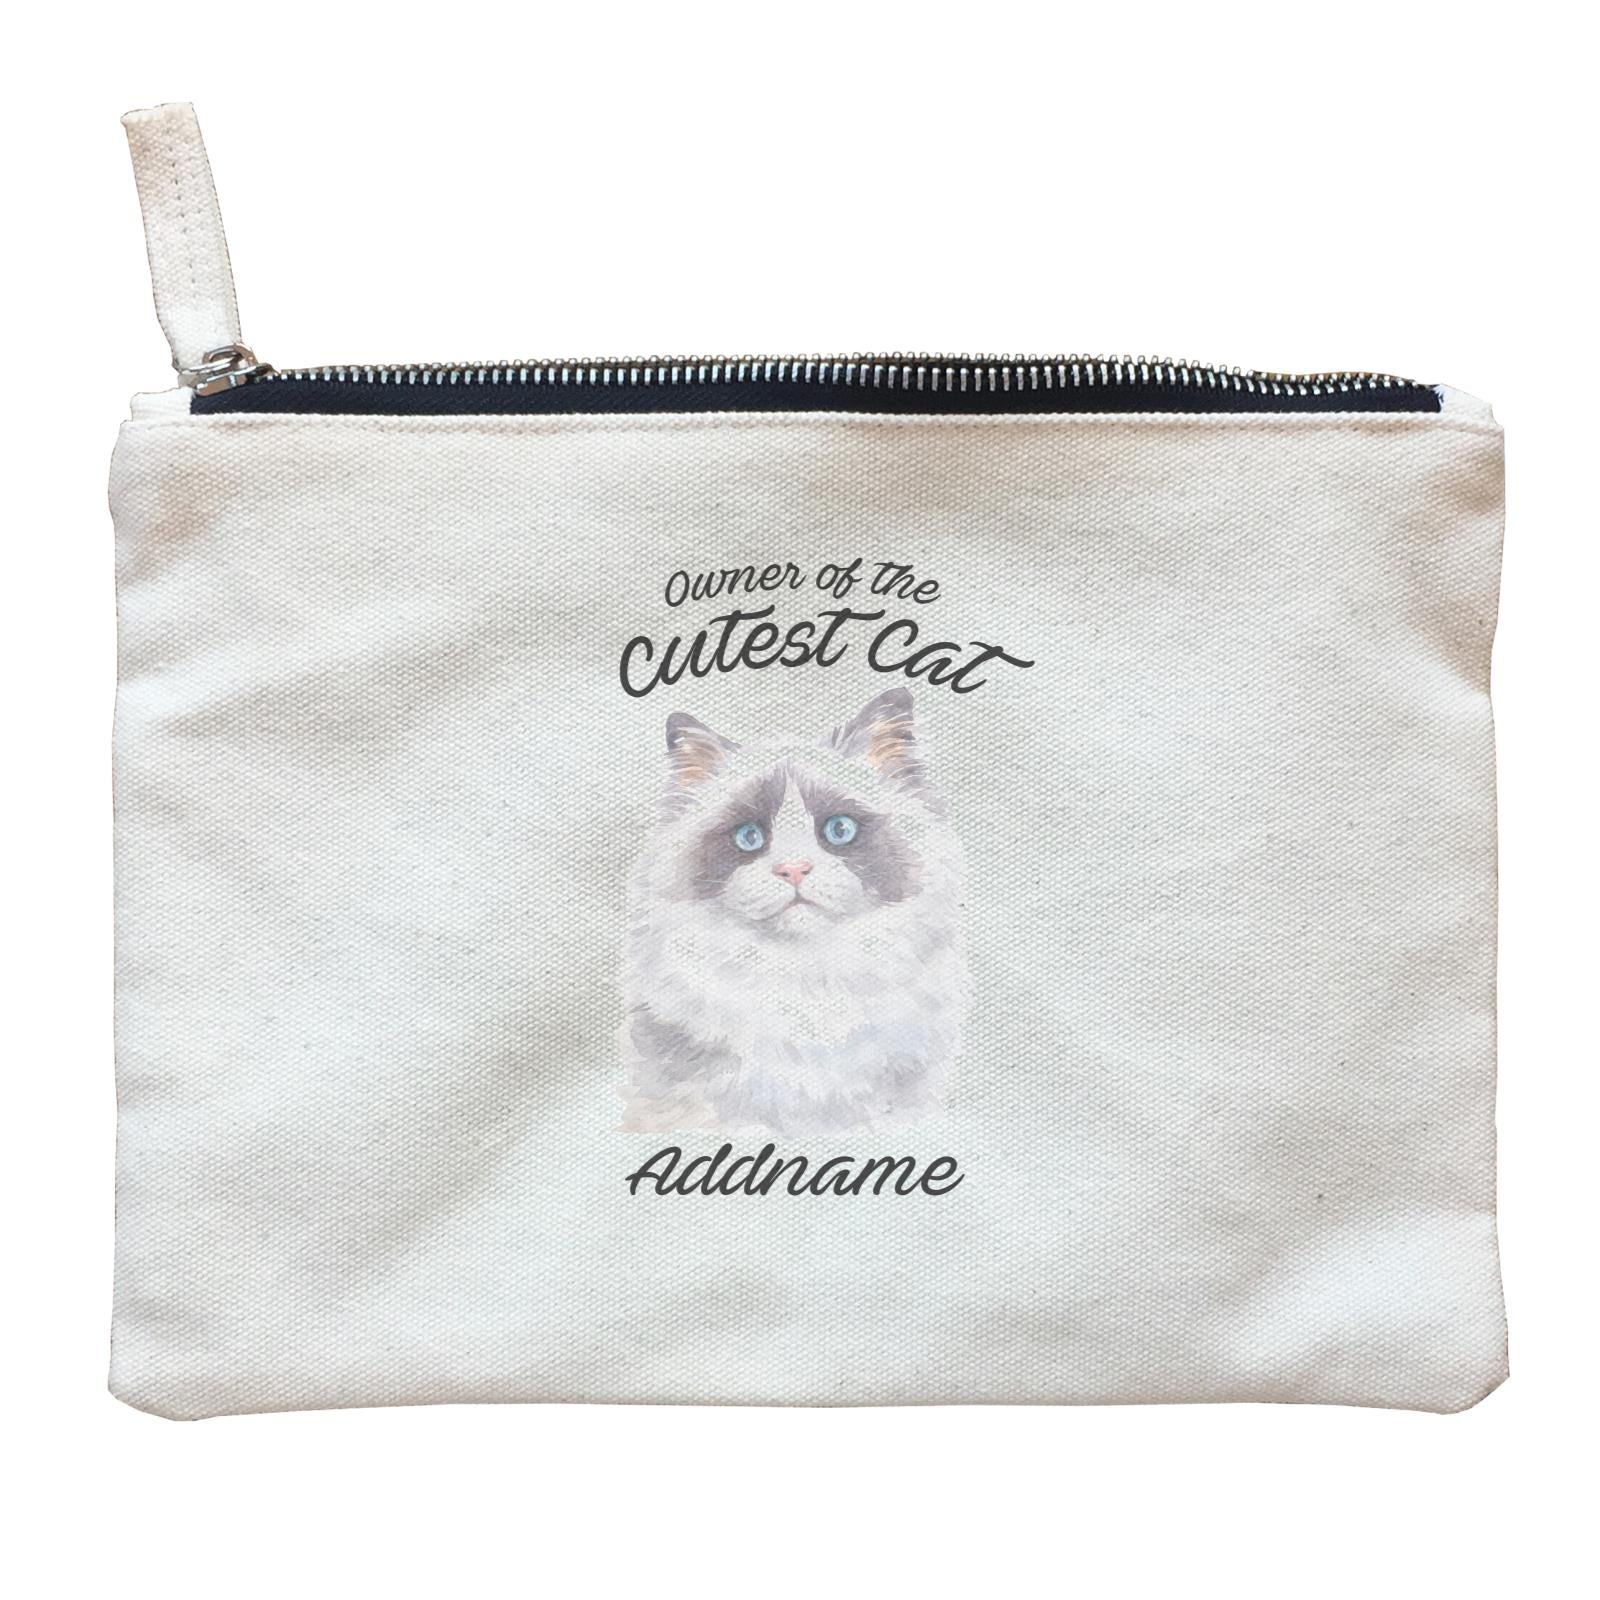 Watercolor Owner Of The Cutest Cat Ragdoll Cat Addname Zipper Pouch